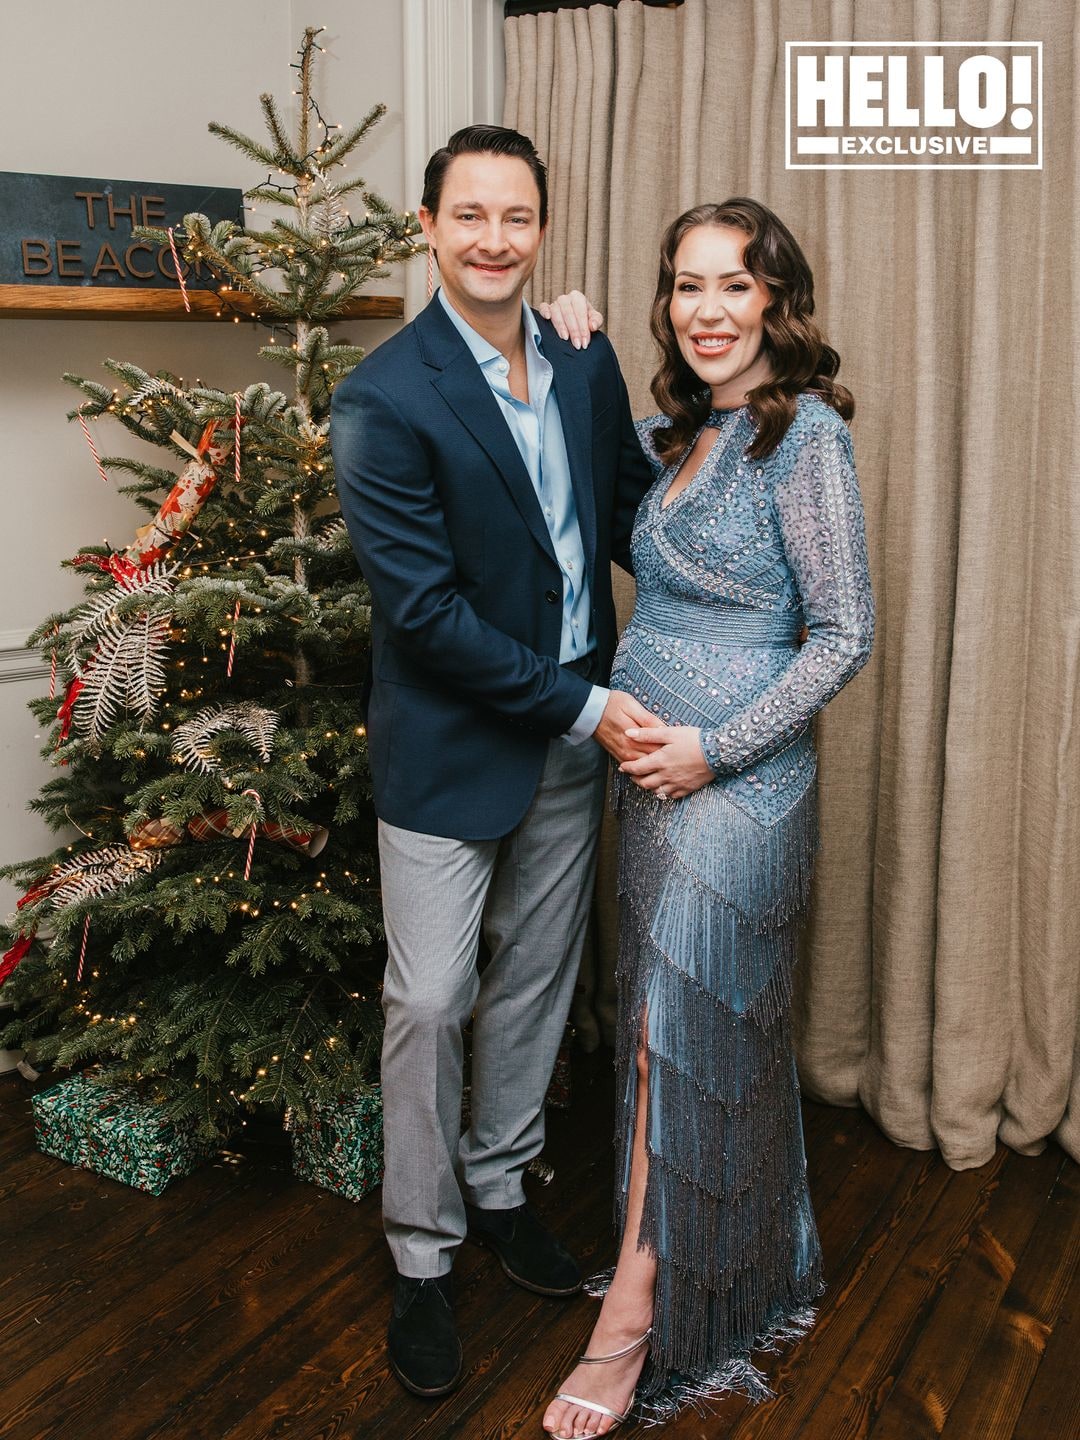 Ellie Phillips pregnancy reveal photoshoot with husband Robert Dee with Christmas tree